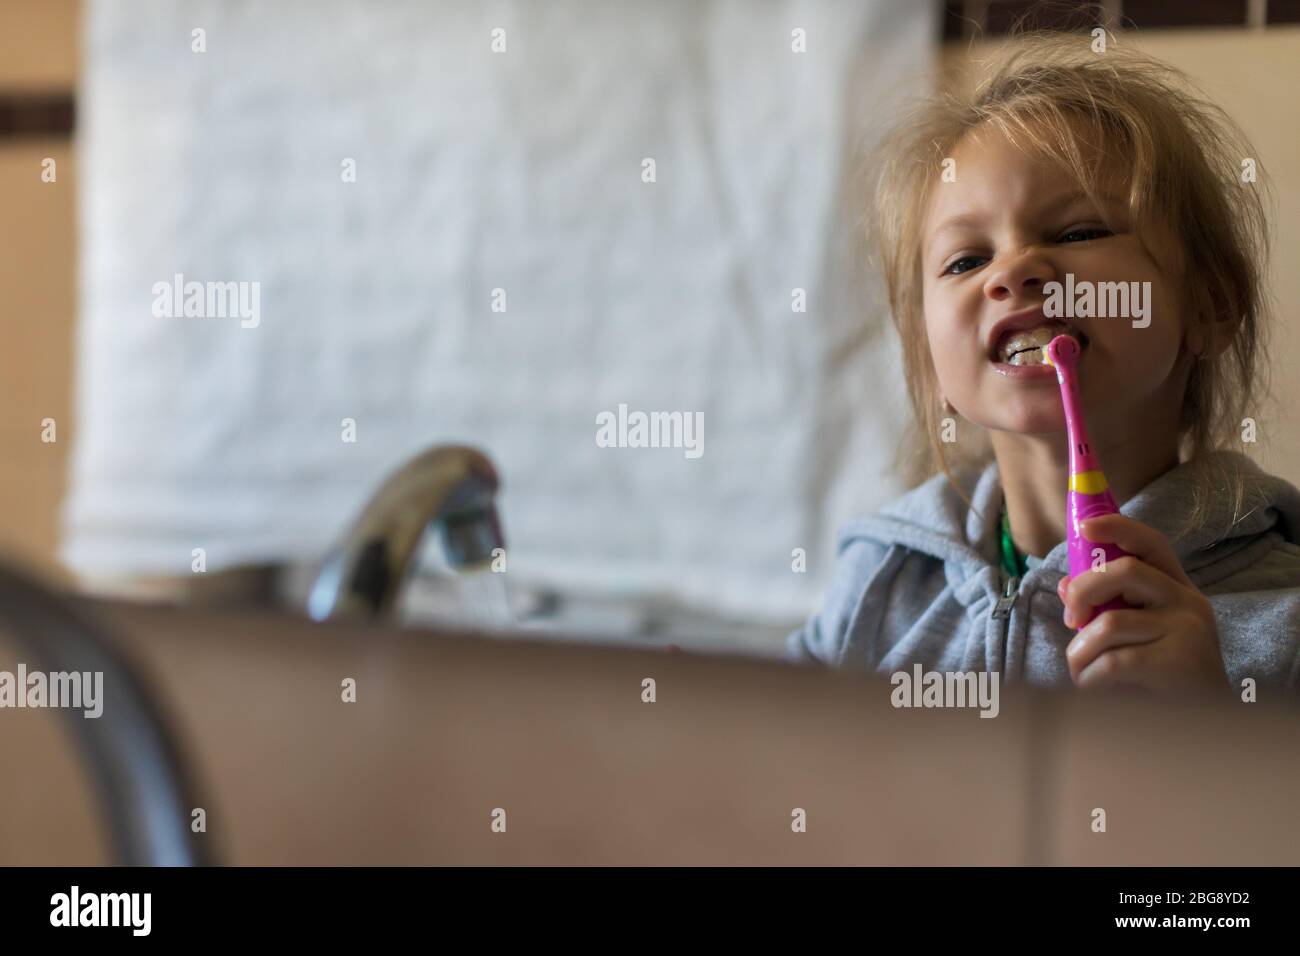 Emotional close up of a cute little girl brushing teeth with electric toothbrush. Stock Photo